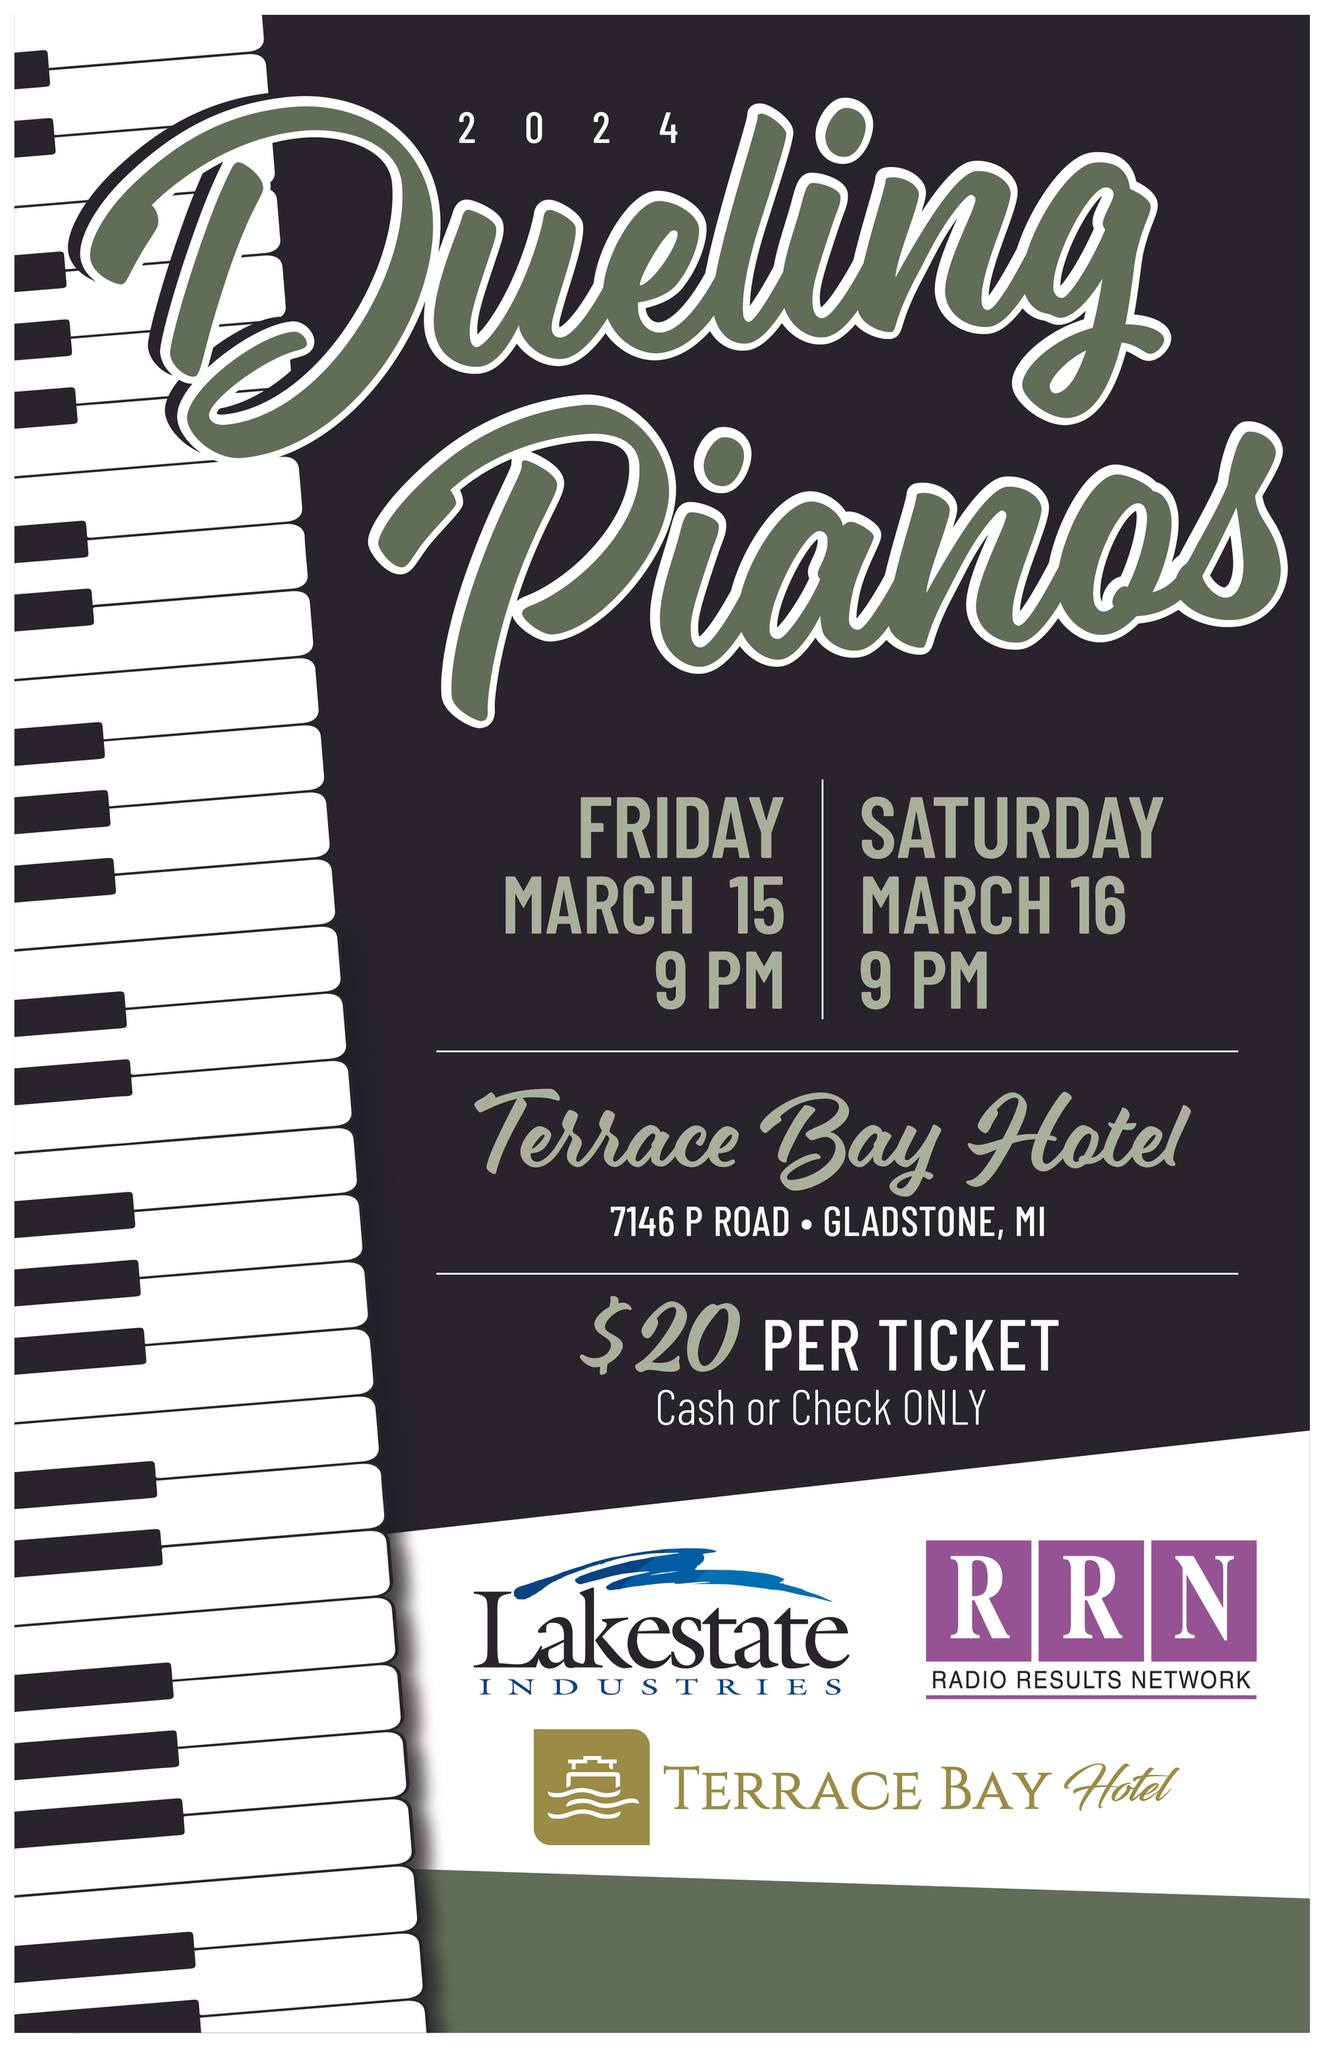 Dueling Pianos, March 15th - 16th @ Terrace Bay Hotel